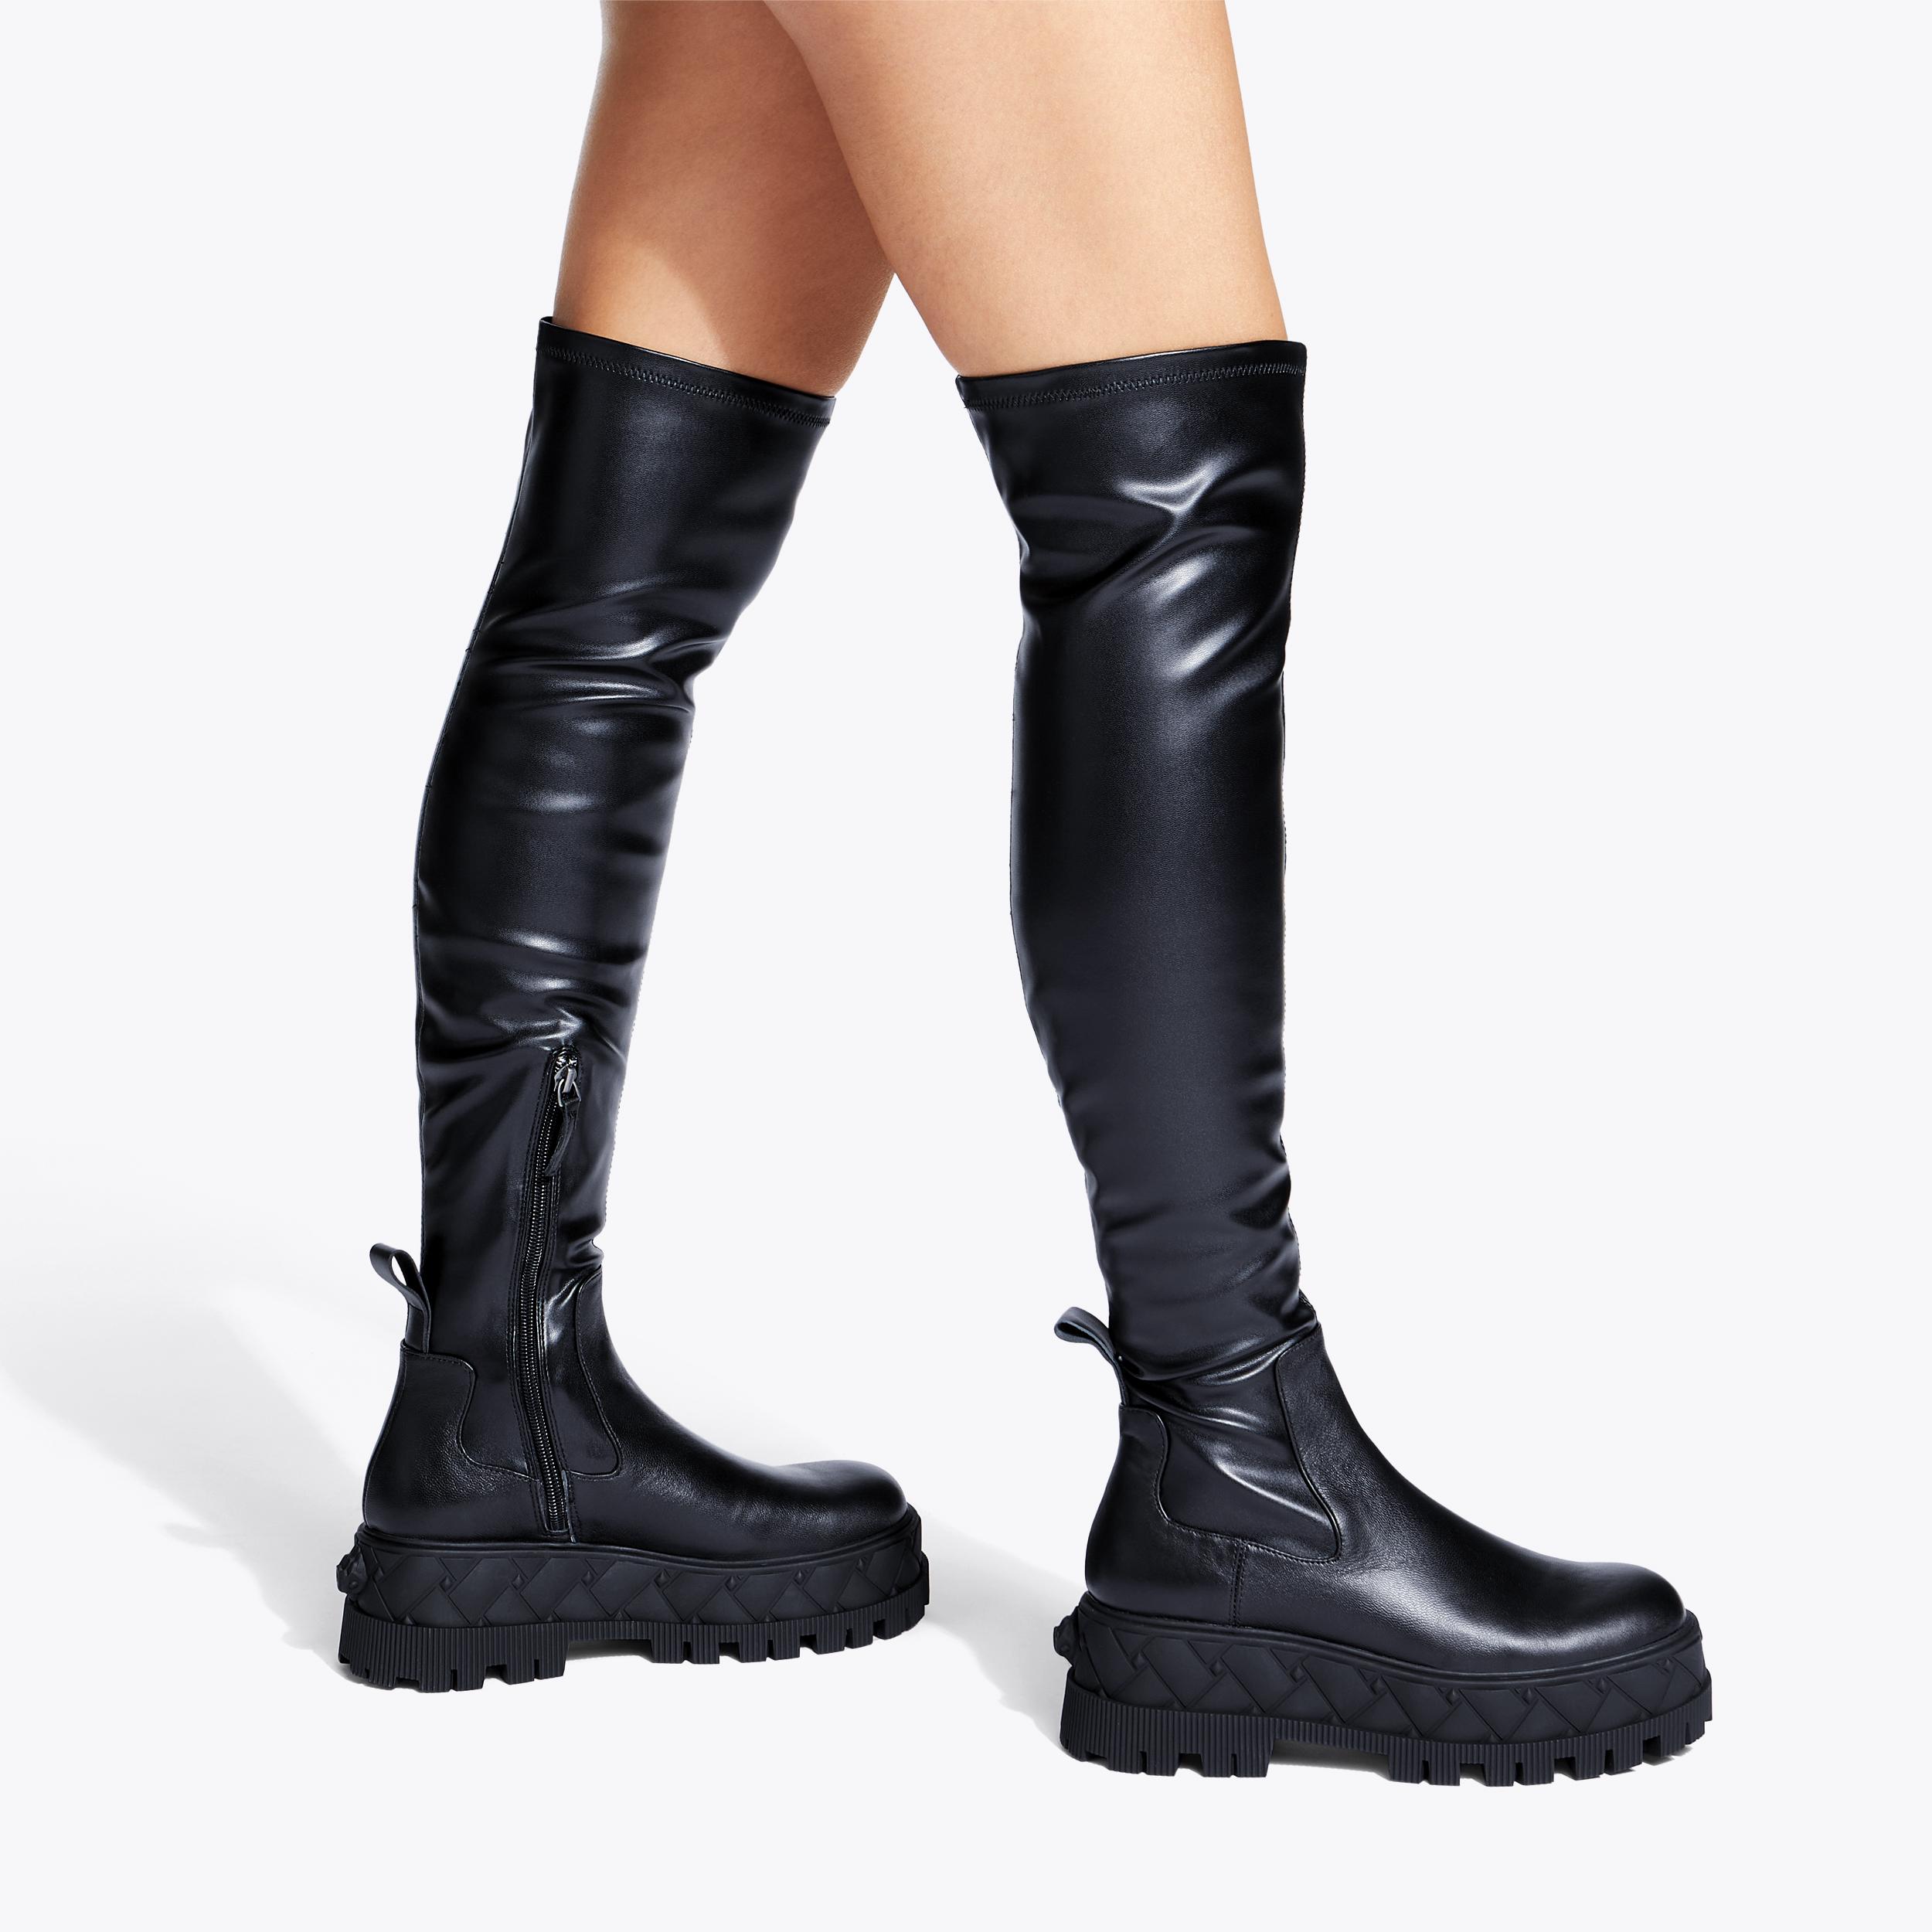 LONDON OTK STRETCH Over The Knee Black Leather Boots by KURT GEIGER LONDON